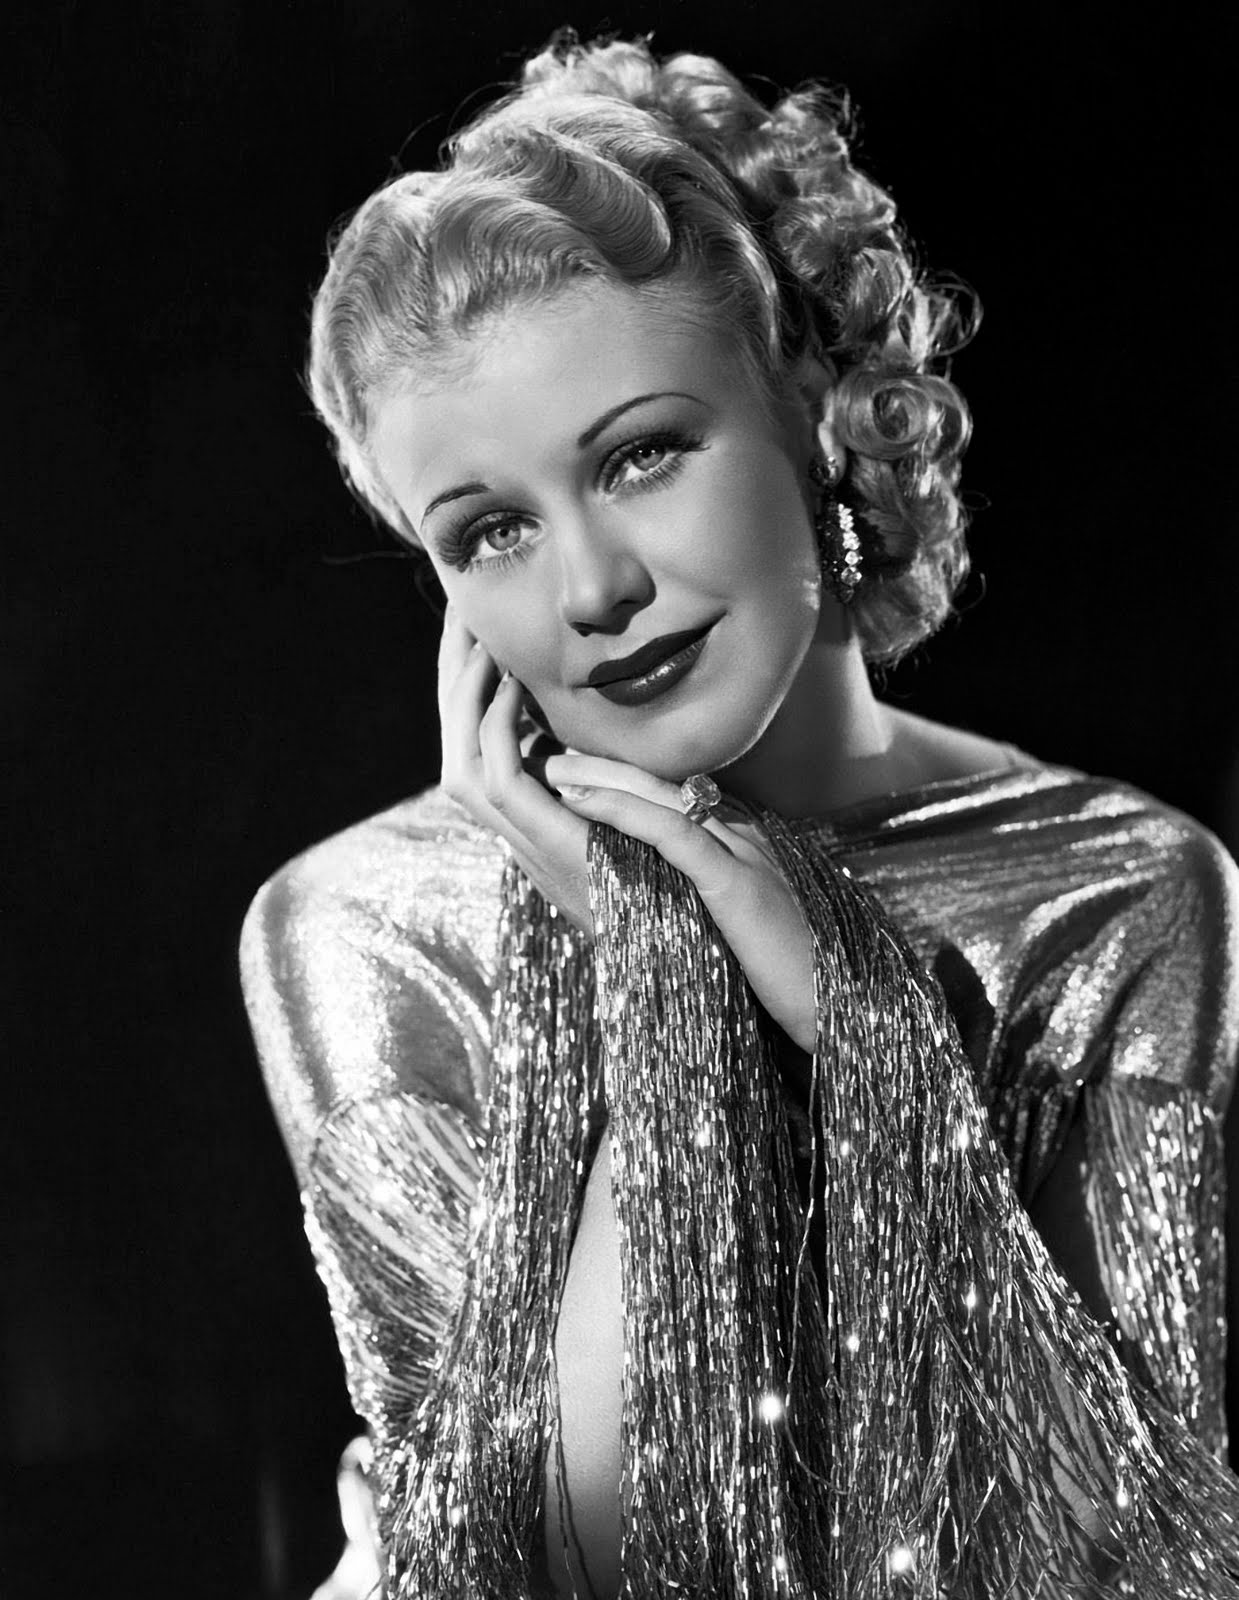 THE VINTAGE FILM COSTUME COLLECTOR: GINGER ROGERS SHALL WE DANCE?